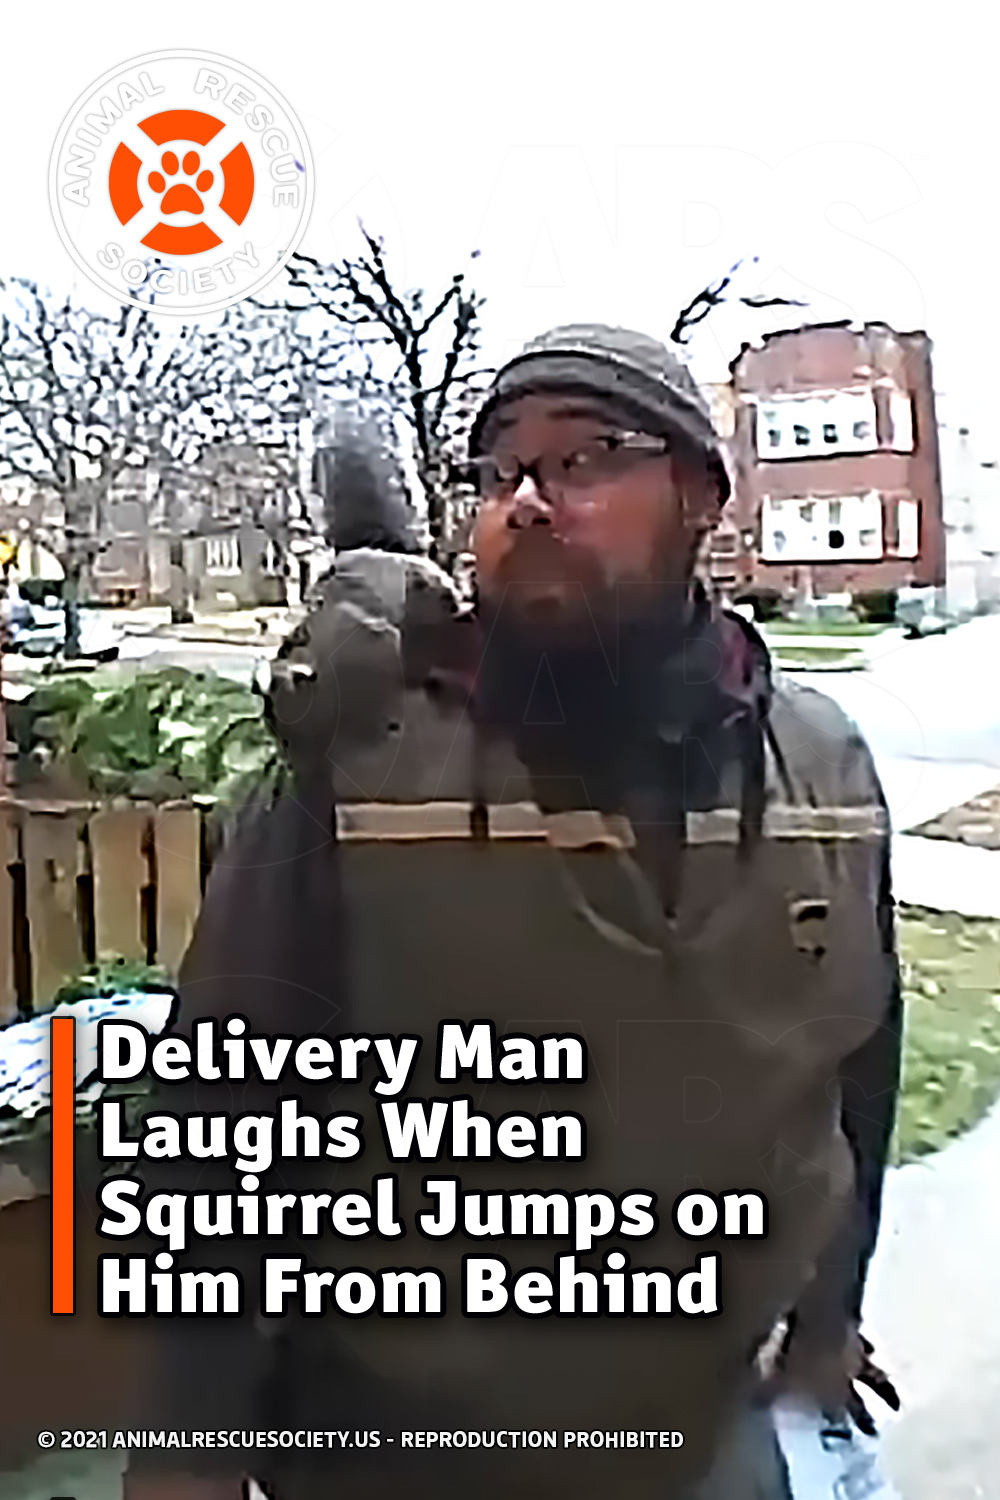 Delivery Man Laughs When Squirrel Jumps on Him From Behind